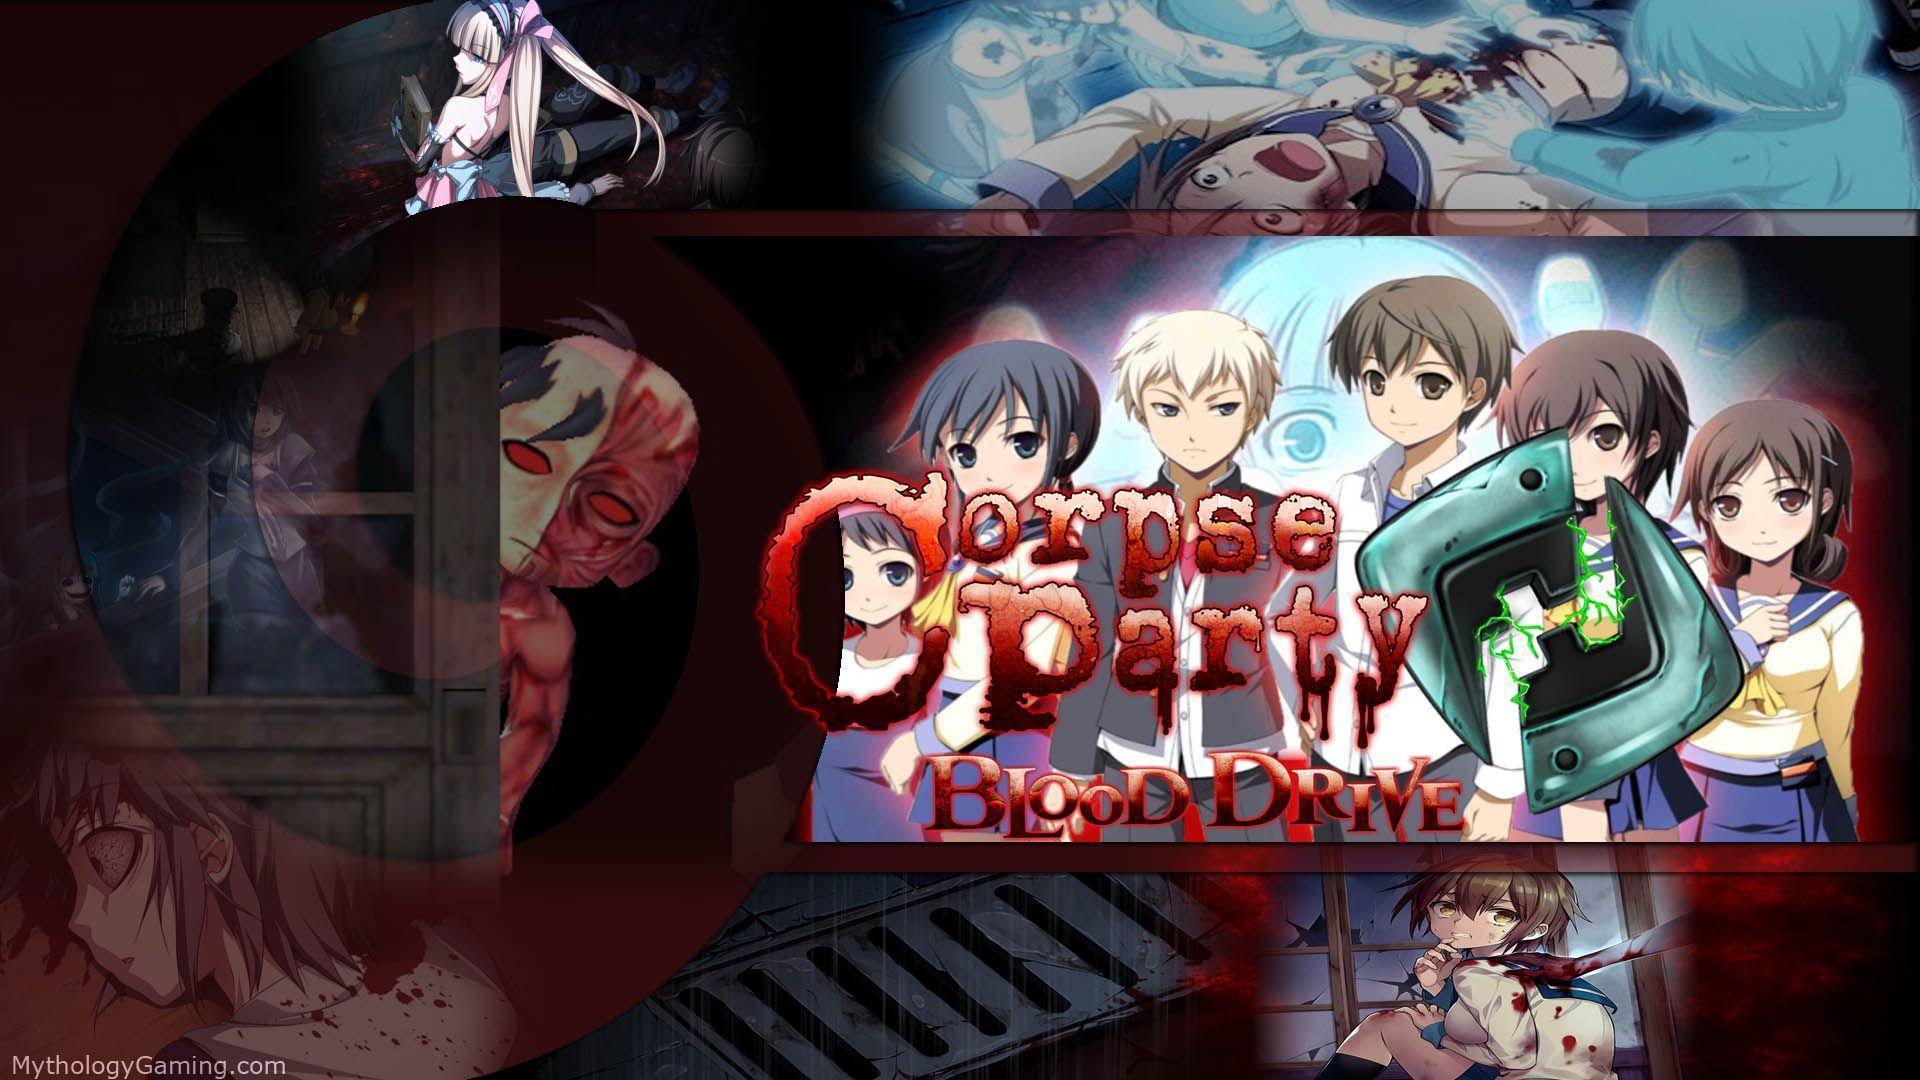 Corpse Party Wallpaper, 32 PC Corpse Party Background